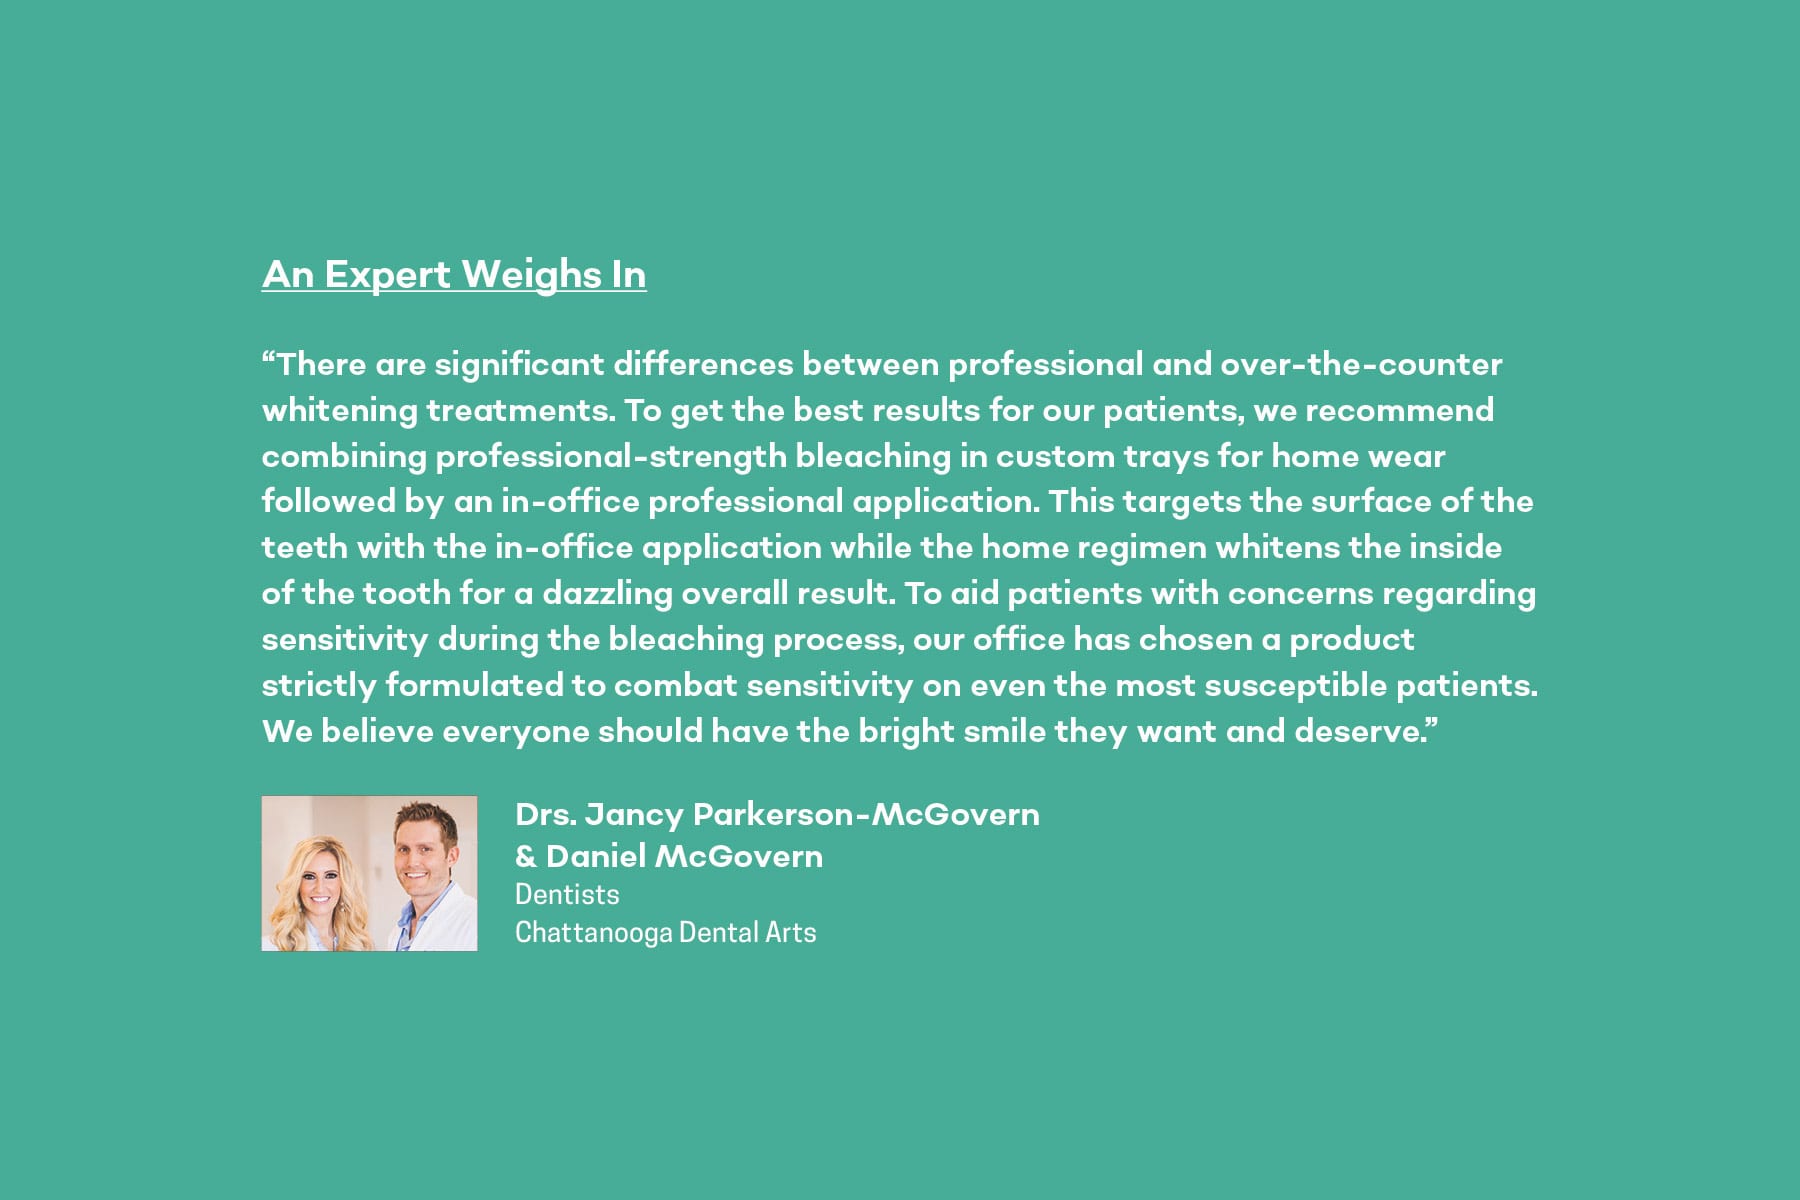 Dr.s Jancy Parkerson-McGovern and Daniel McGovern share expert advice on teeth whitening